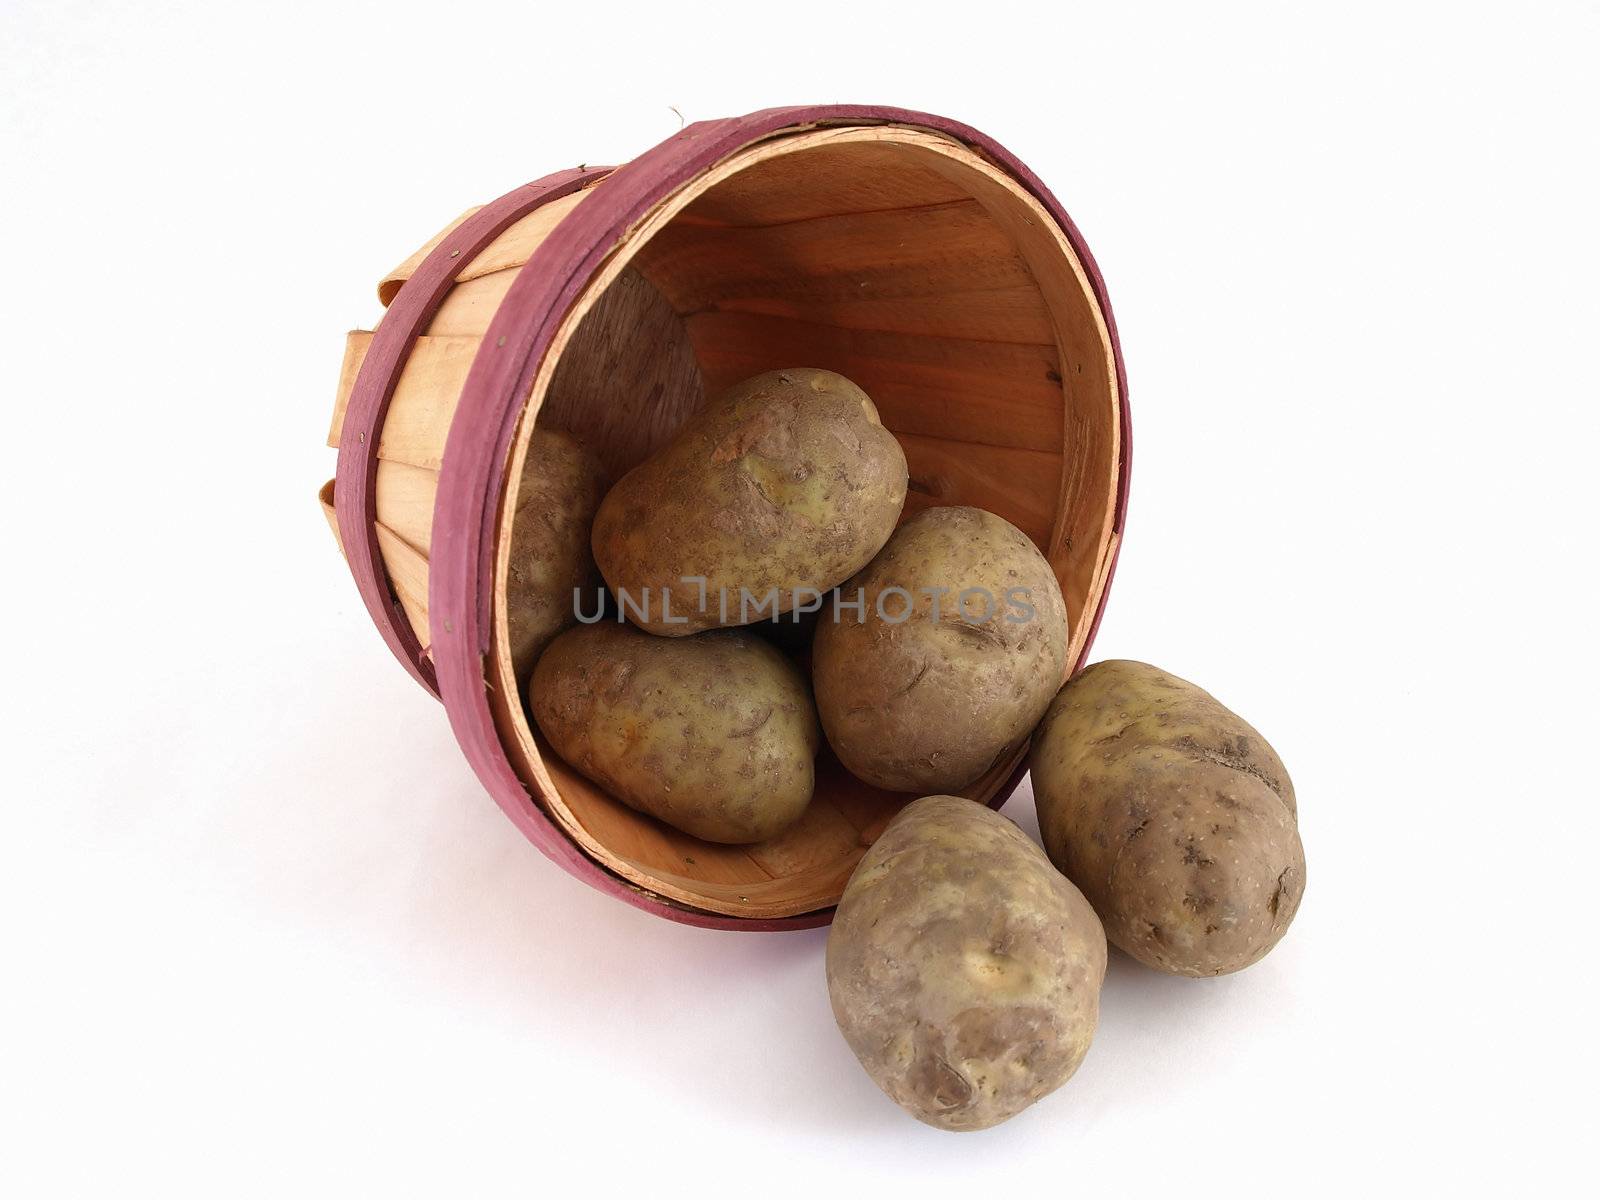 A basket of potatoes. Studio isolated on a white background.